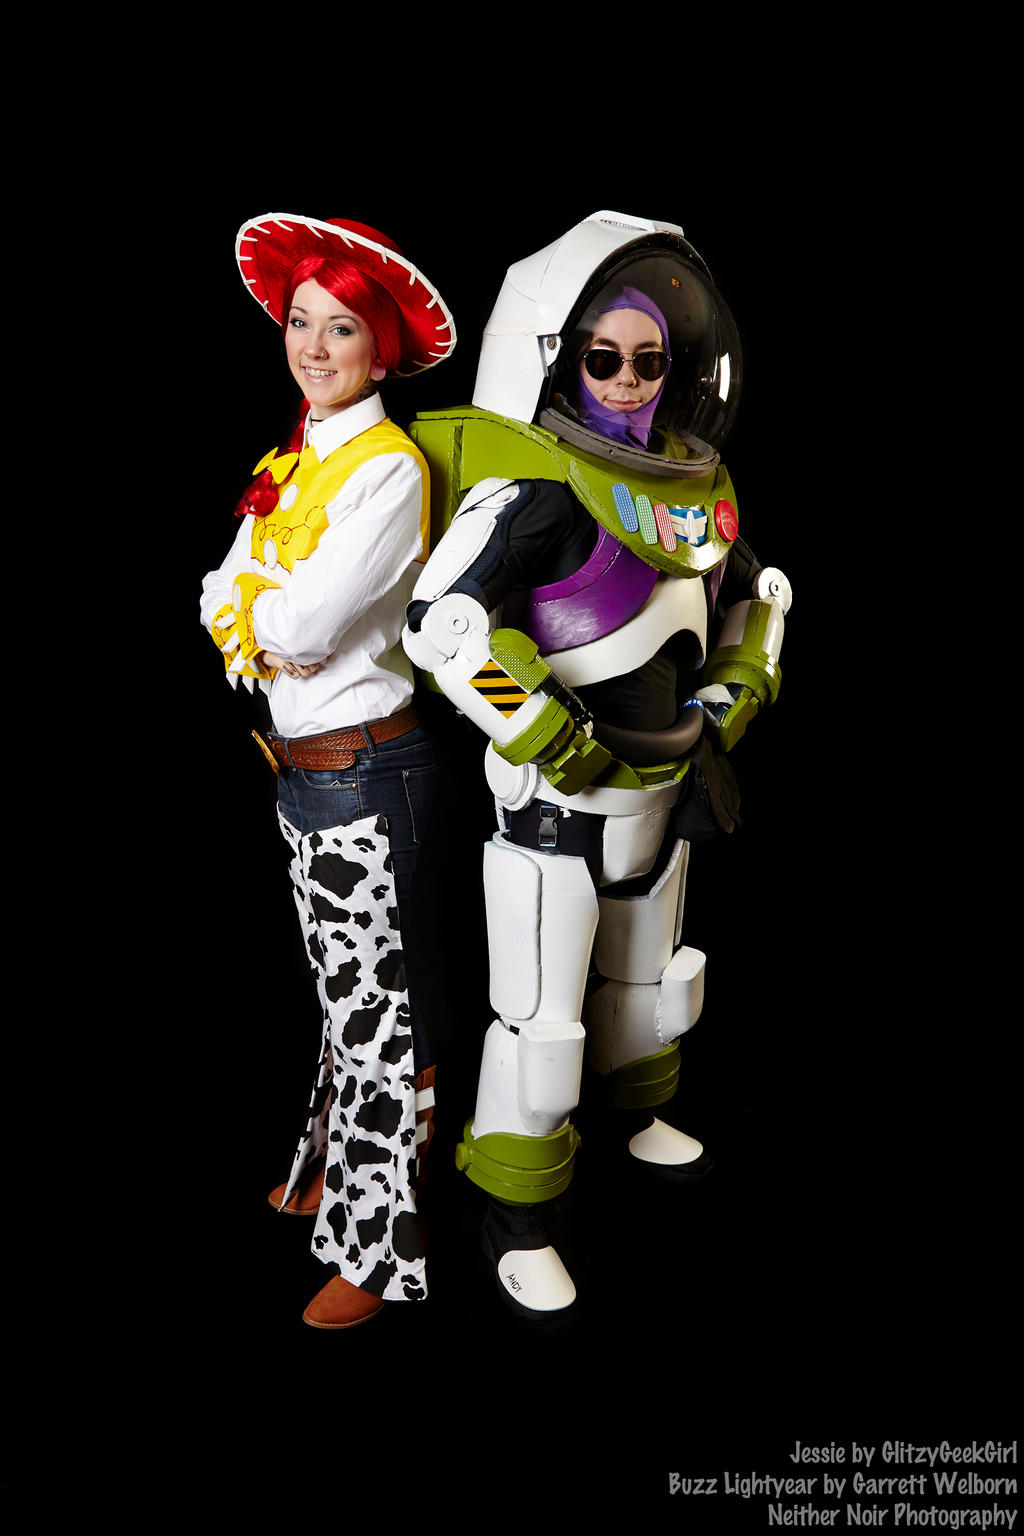 Jessie and Buzz Lightyear Cosplay from Toy Story by glitzygeekgirl on DeviantArt1024 x 1536